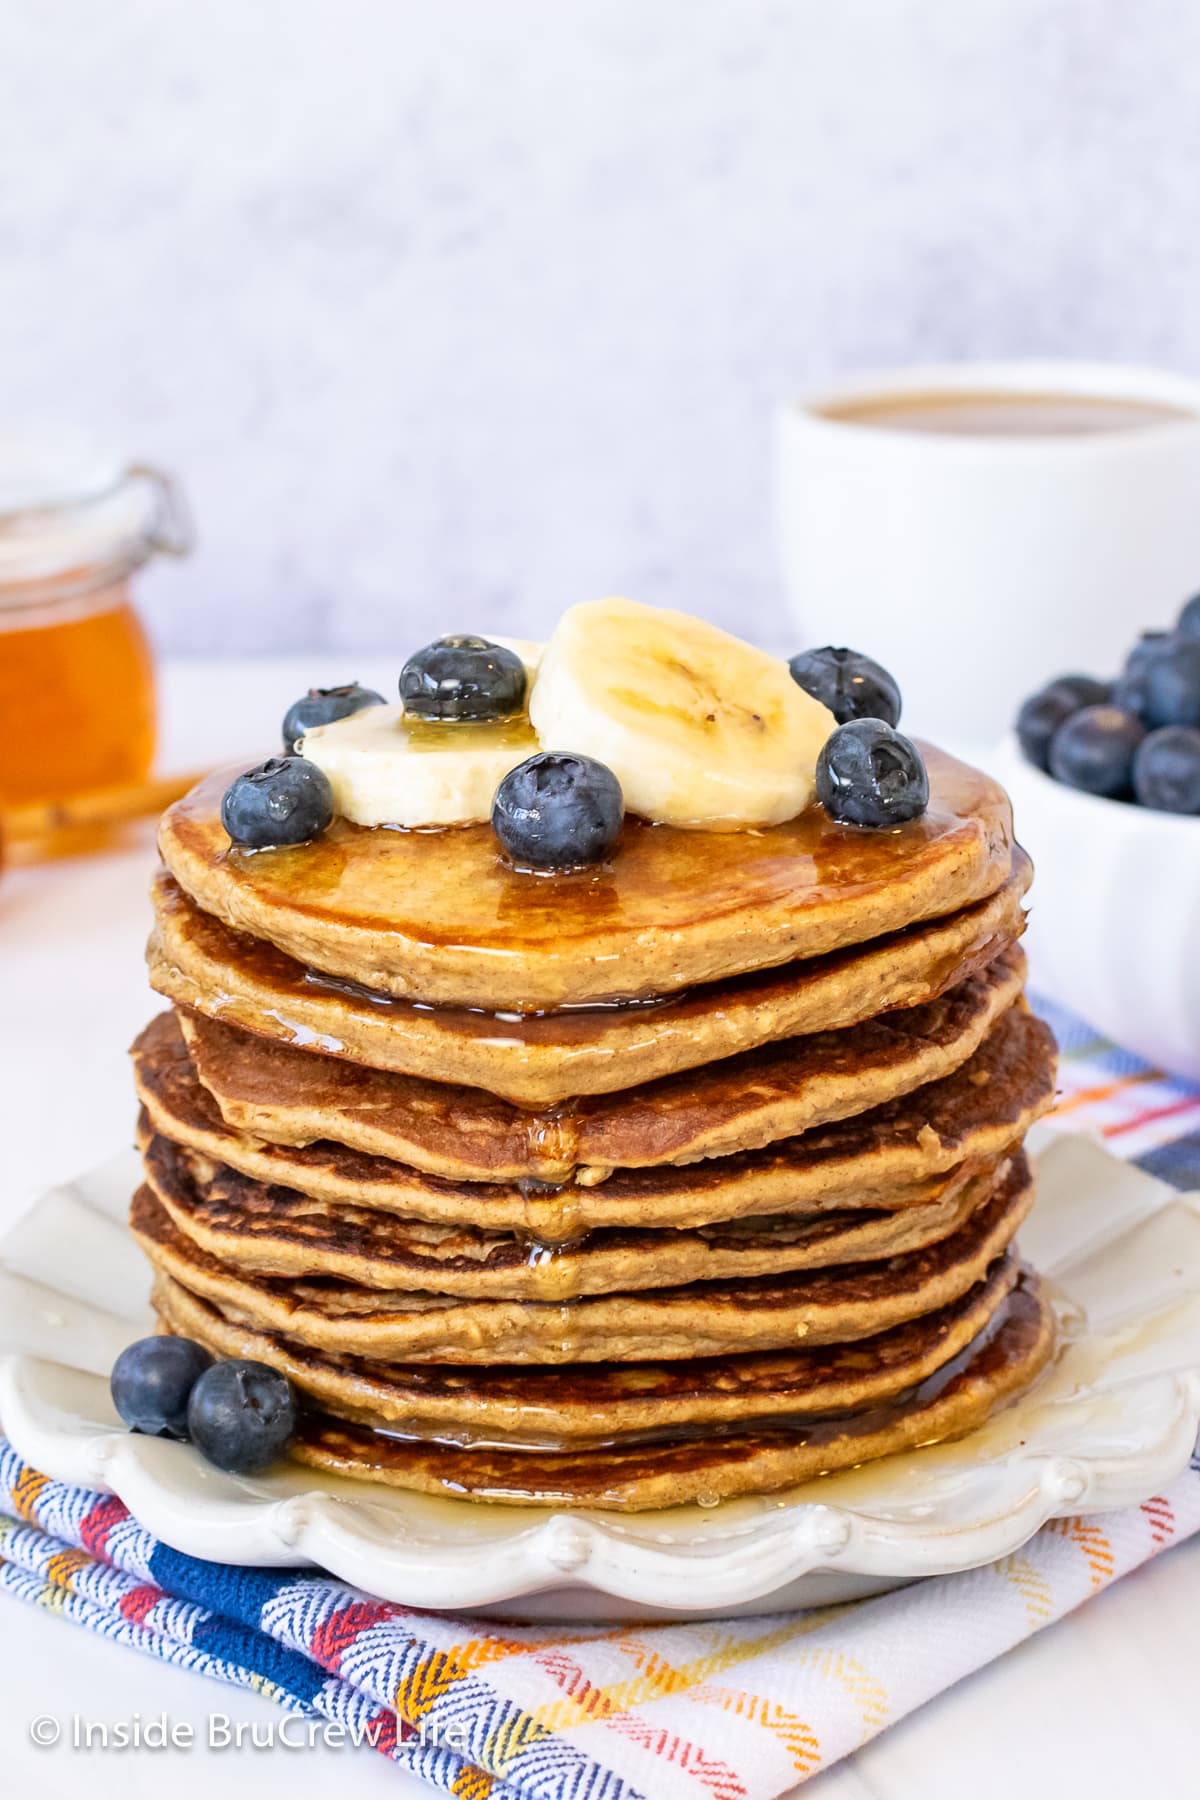 A large stack of banana pancakes topped with blueberries.